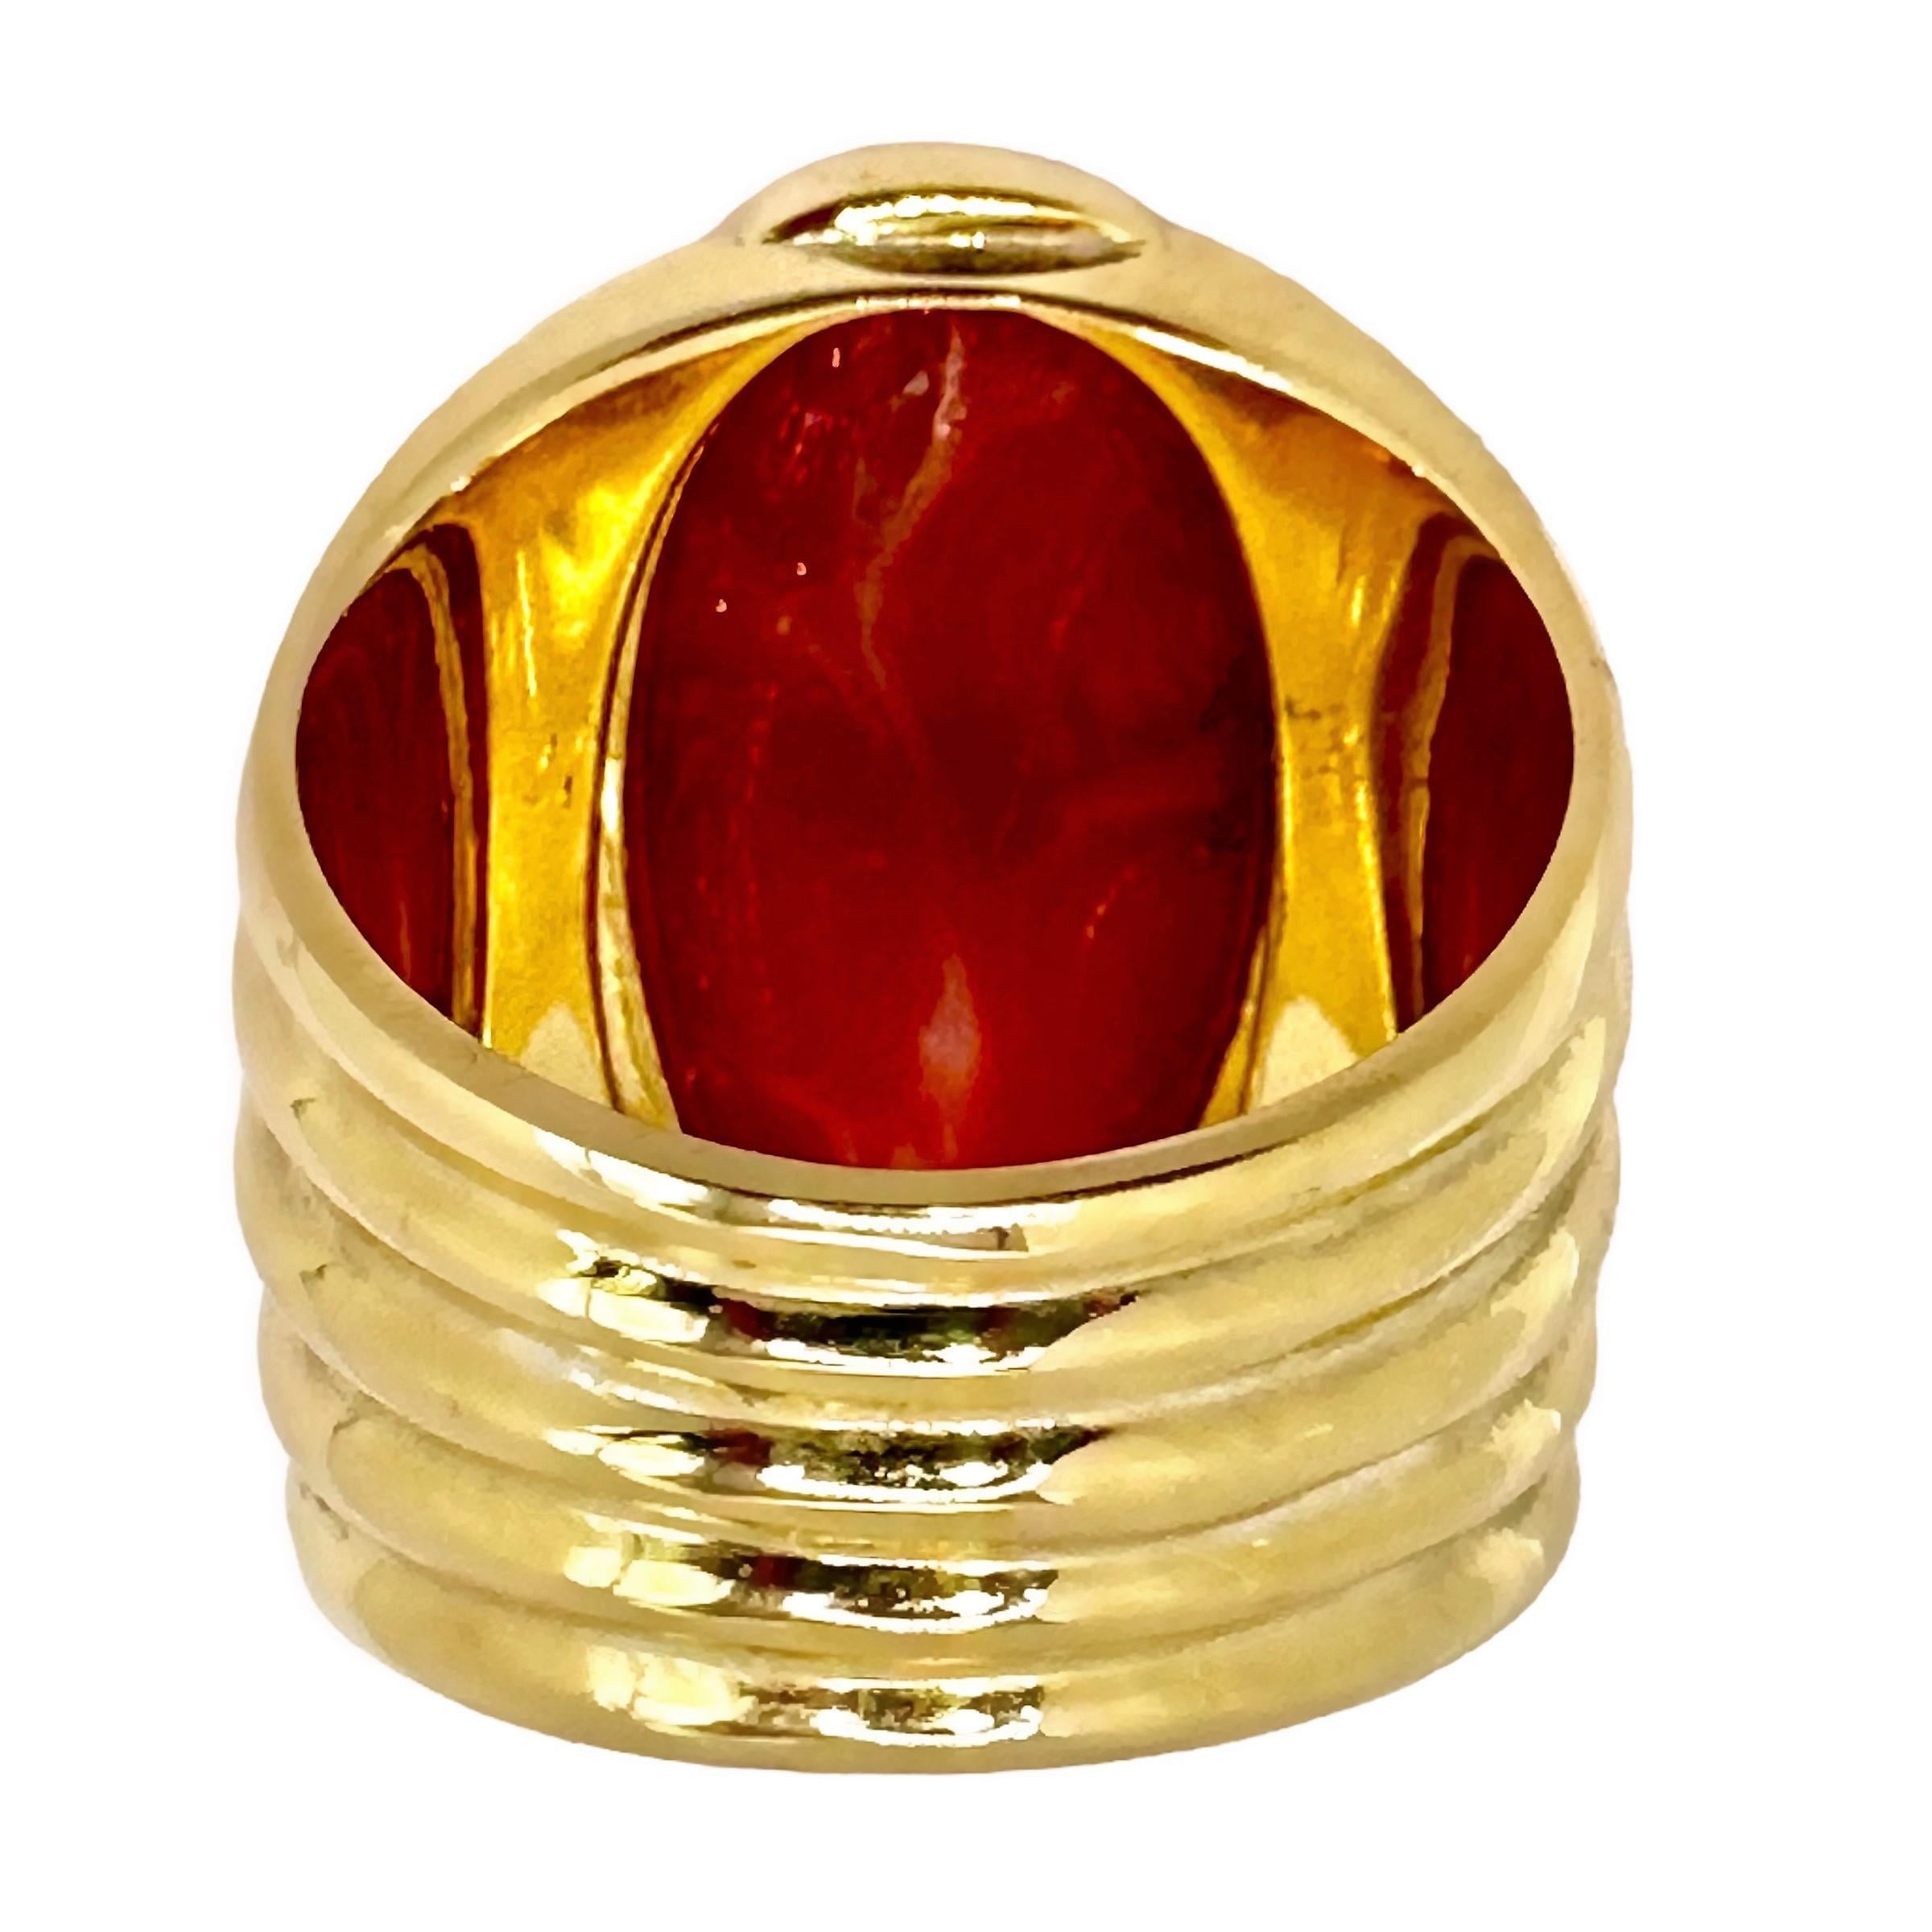 Wide Fluted Gold Ring with Large Deep Red Oxblood Cabochon In Good Condition For Sale In Palm Beach, FL